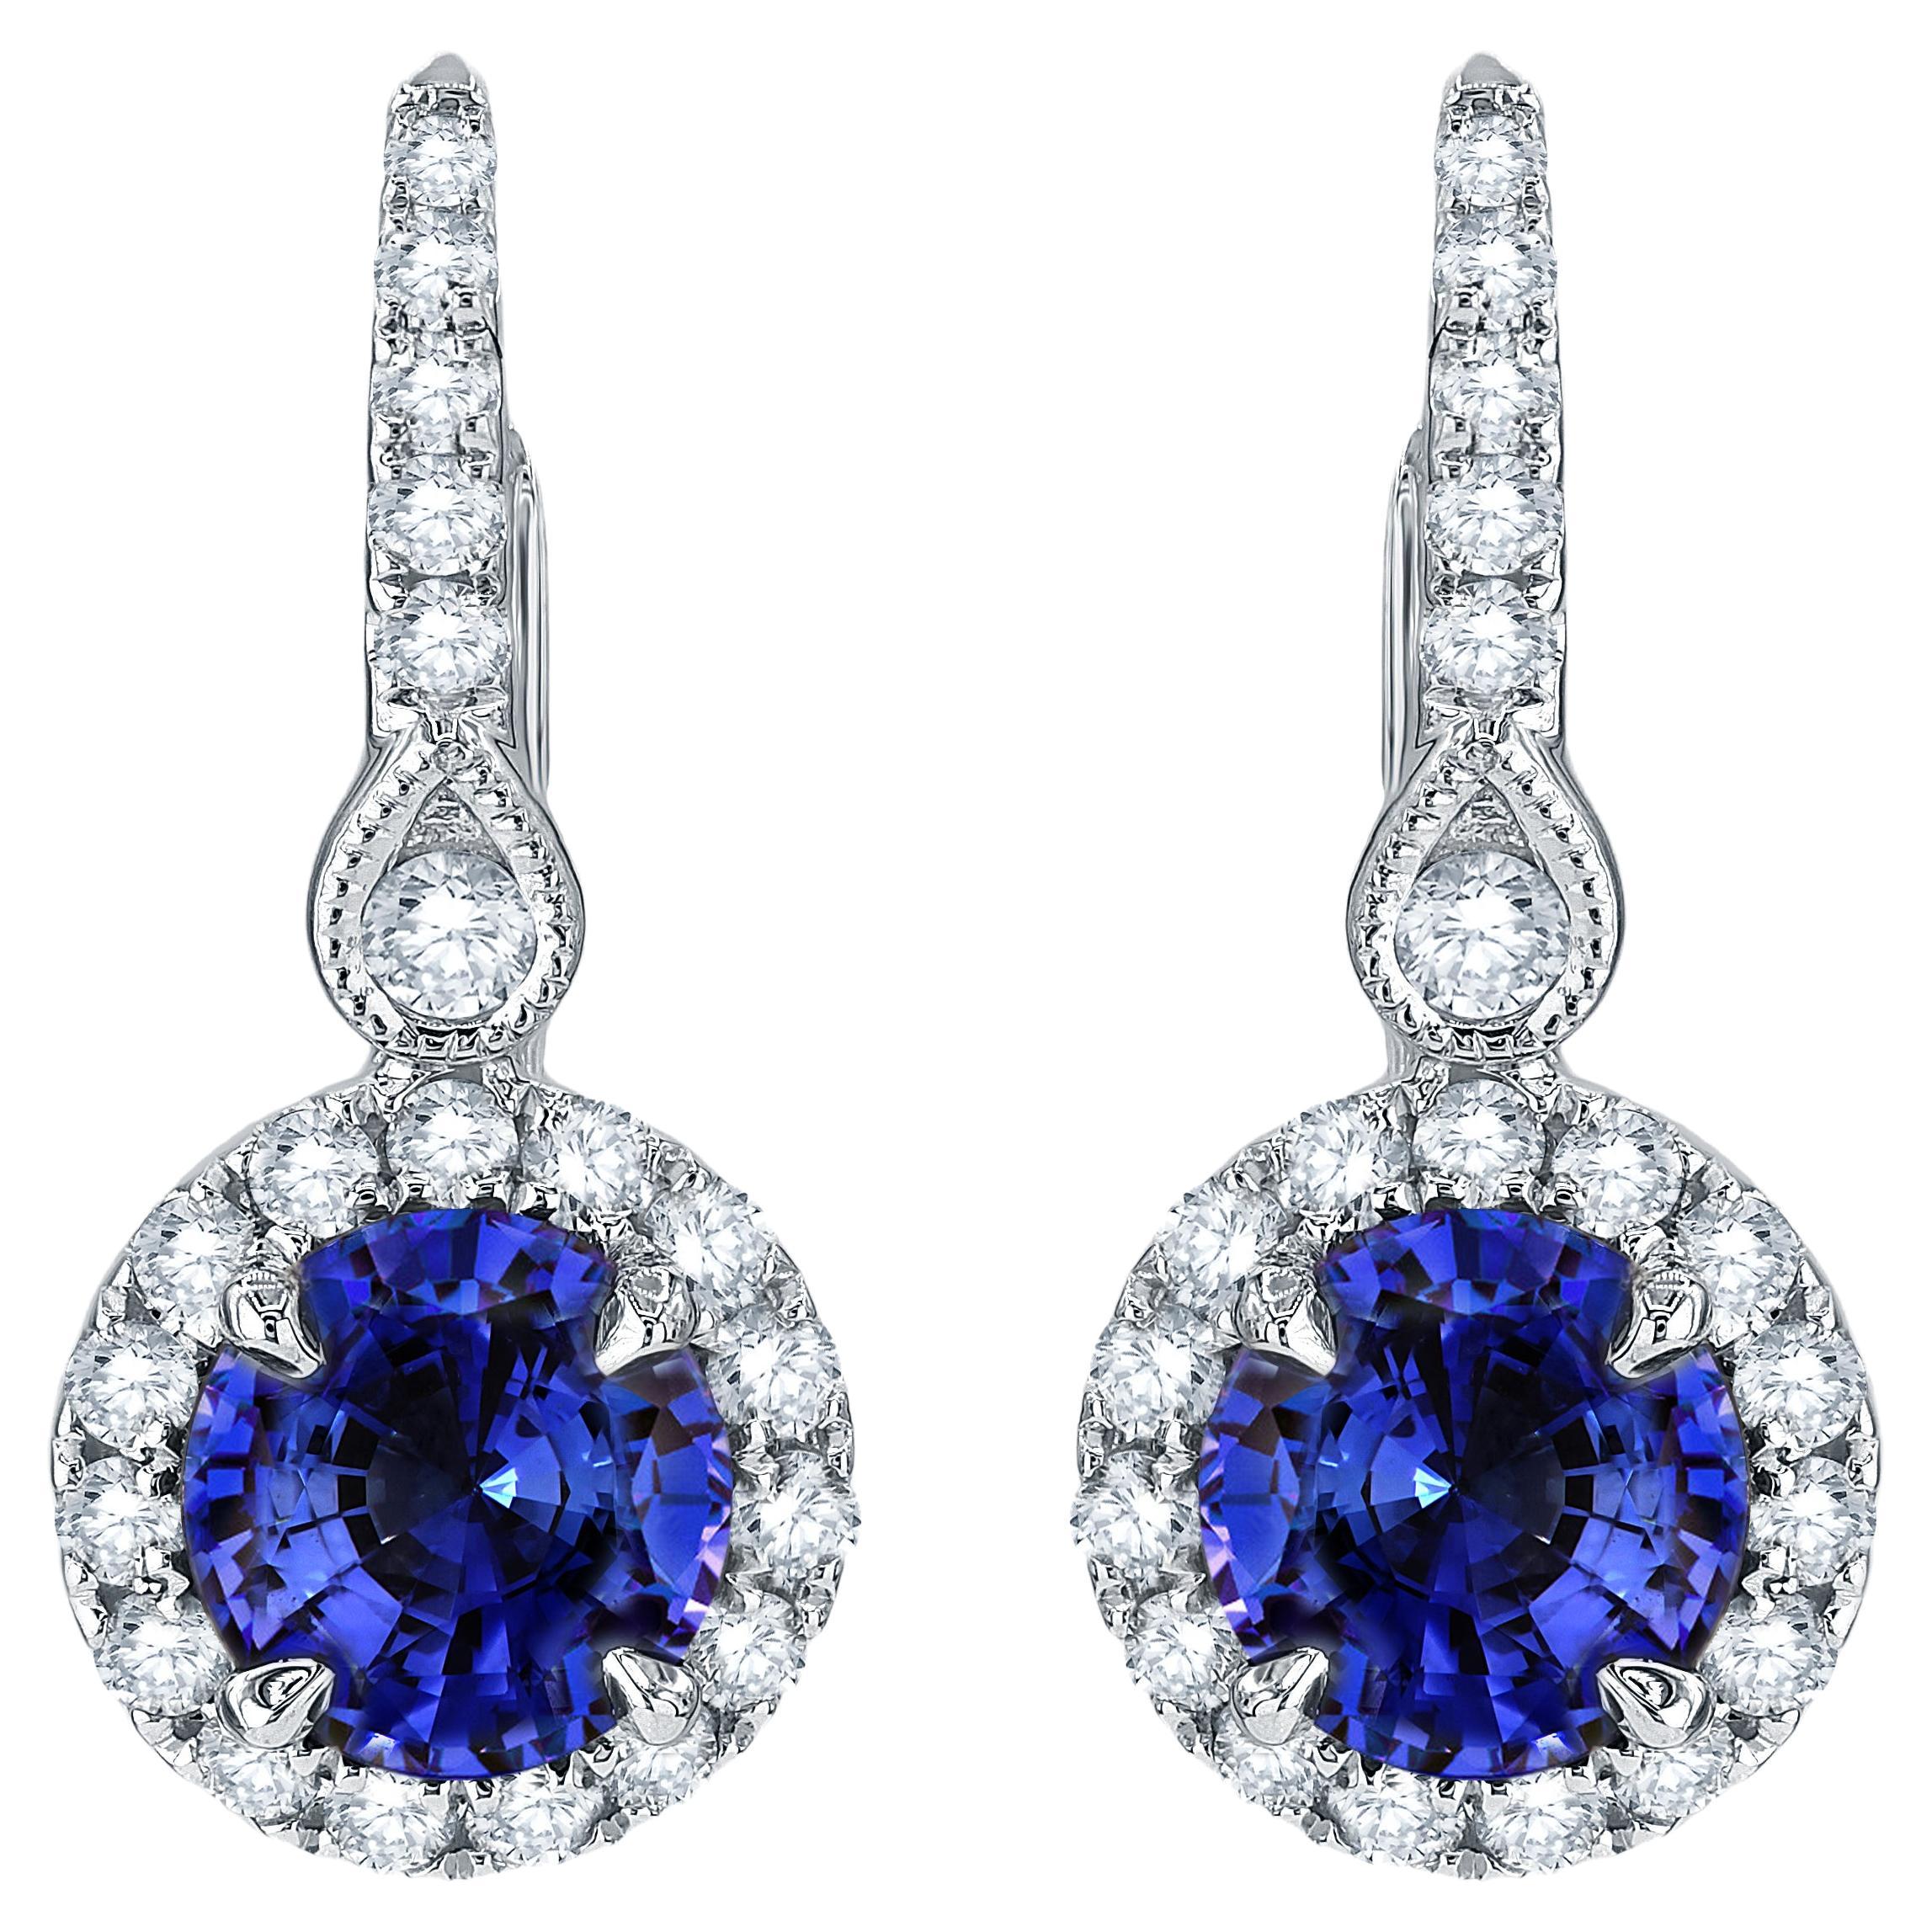 1.57 Carat Round Vivid Blue Sapphire and 0.50 Ct Diamond Earring in 14W ref1900 For Sale